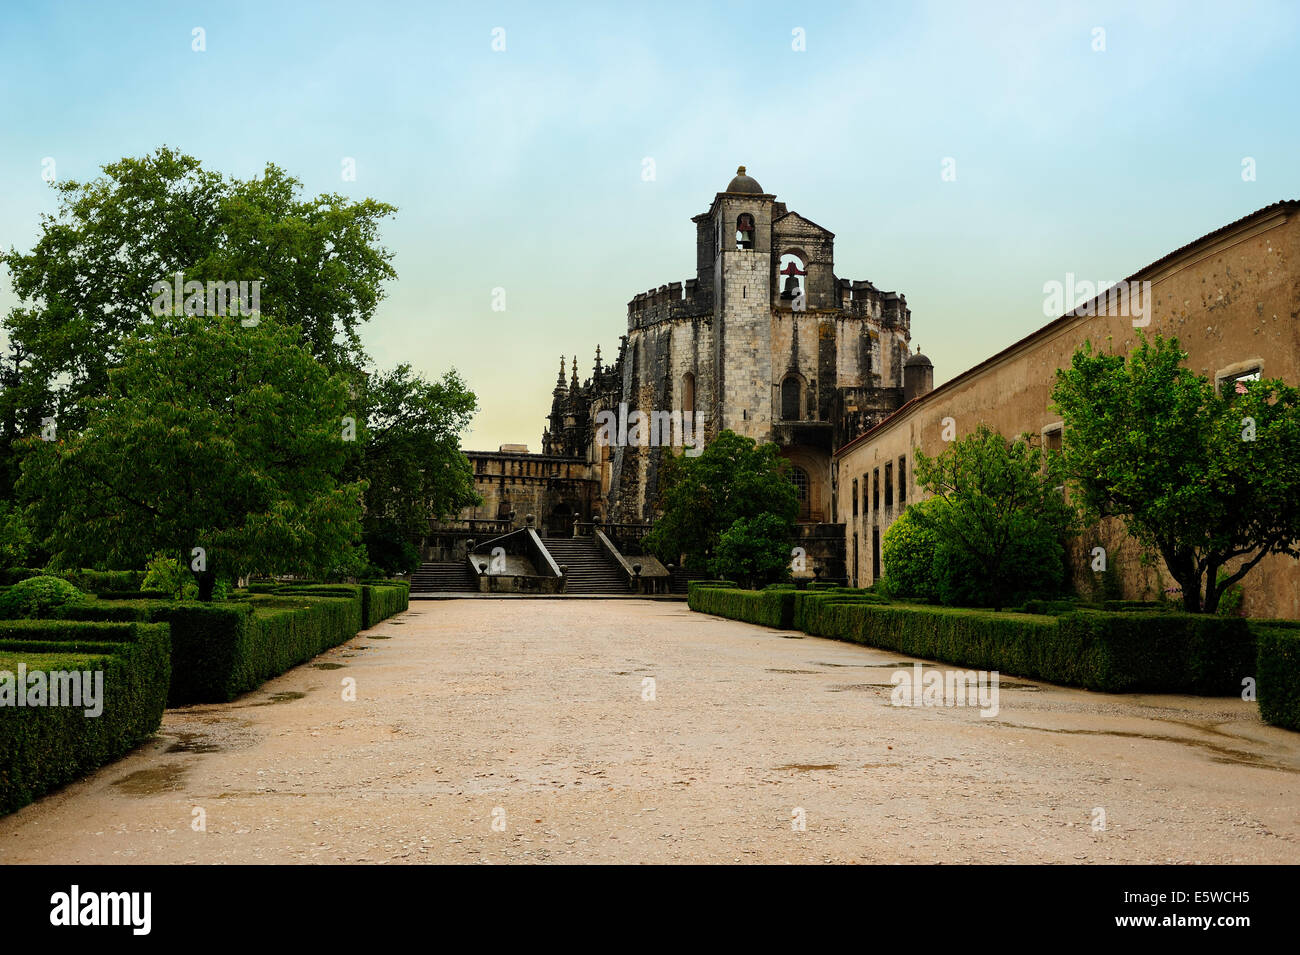 View of the Round Templar church (12th century) of the Convent of the Order of Christ, Tomar, Portugal Stock Photo